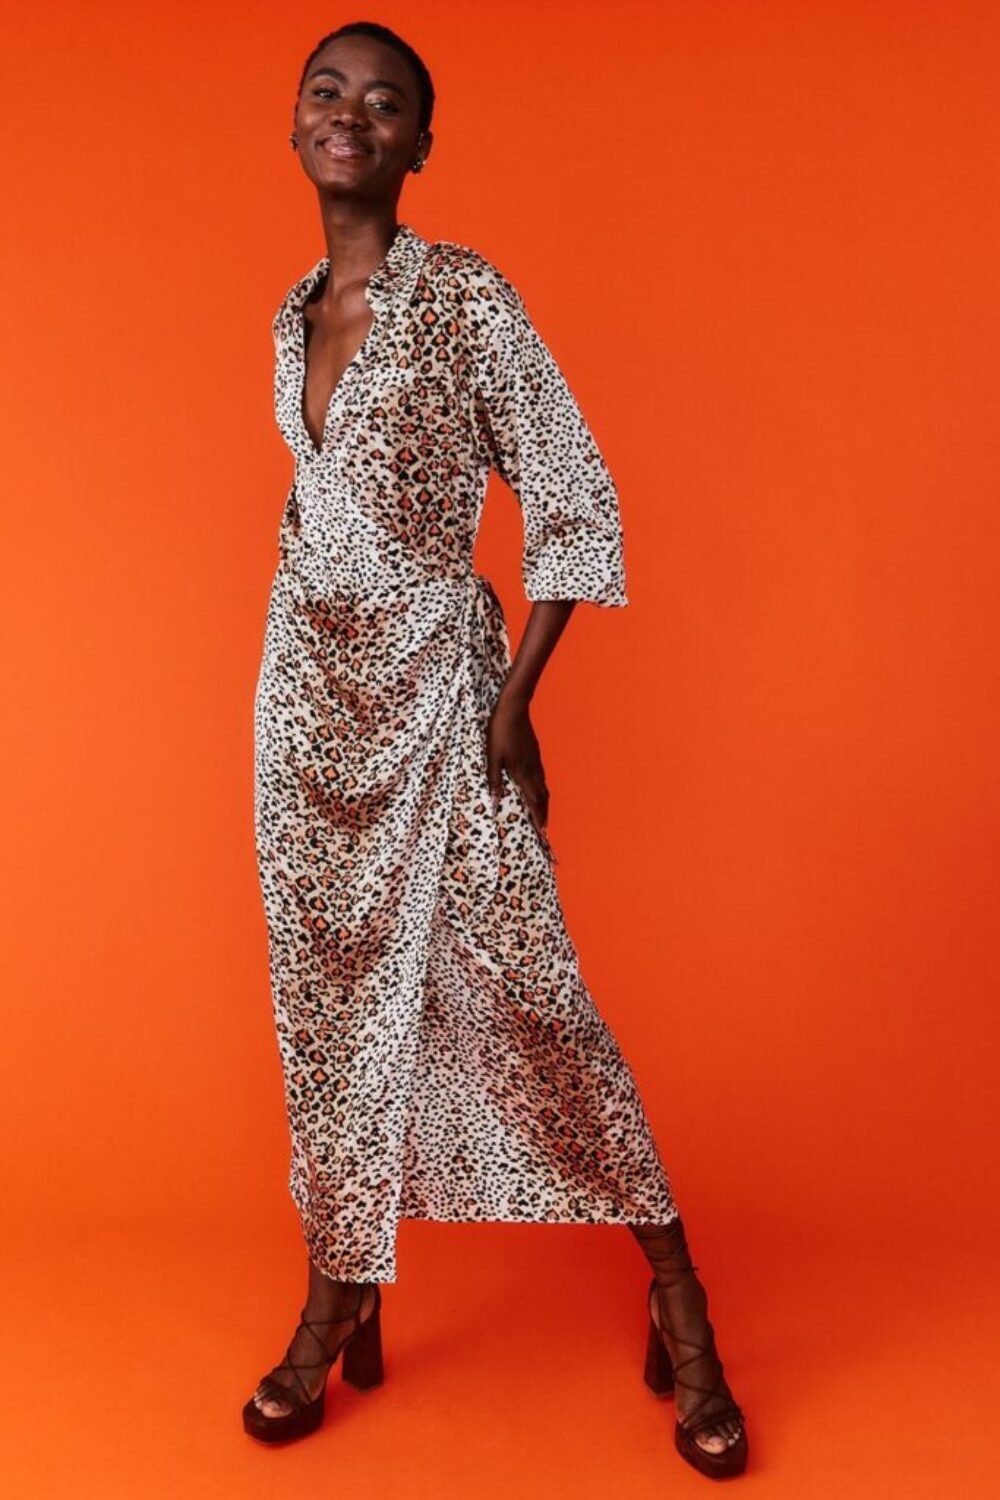 Shop Lux Silk Blend Animal Print Wrap Maxi Dress and women's luxury and designer clothes at www.lux-apparel.co.uk